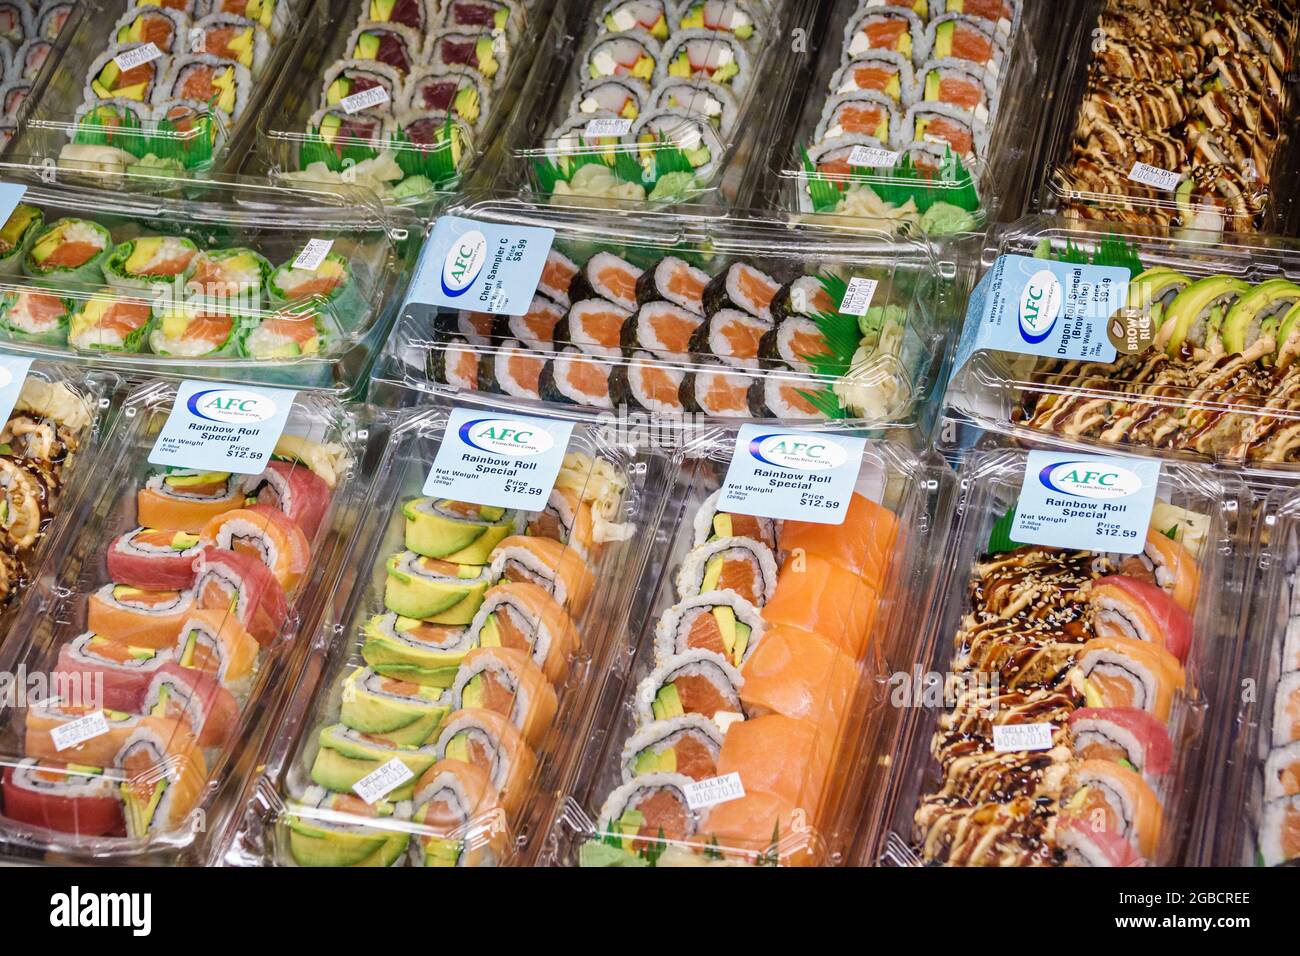 Miami Beach Florida,Publix grocery store supermarket inside interior,prepackaged foods sushi bar rolls display sale, Stock Photo